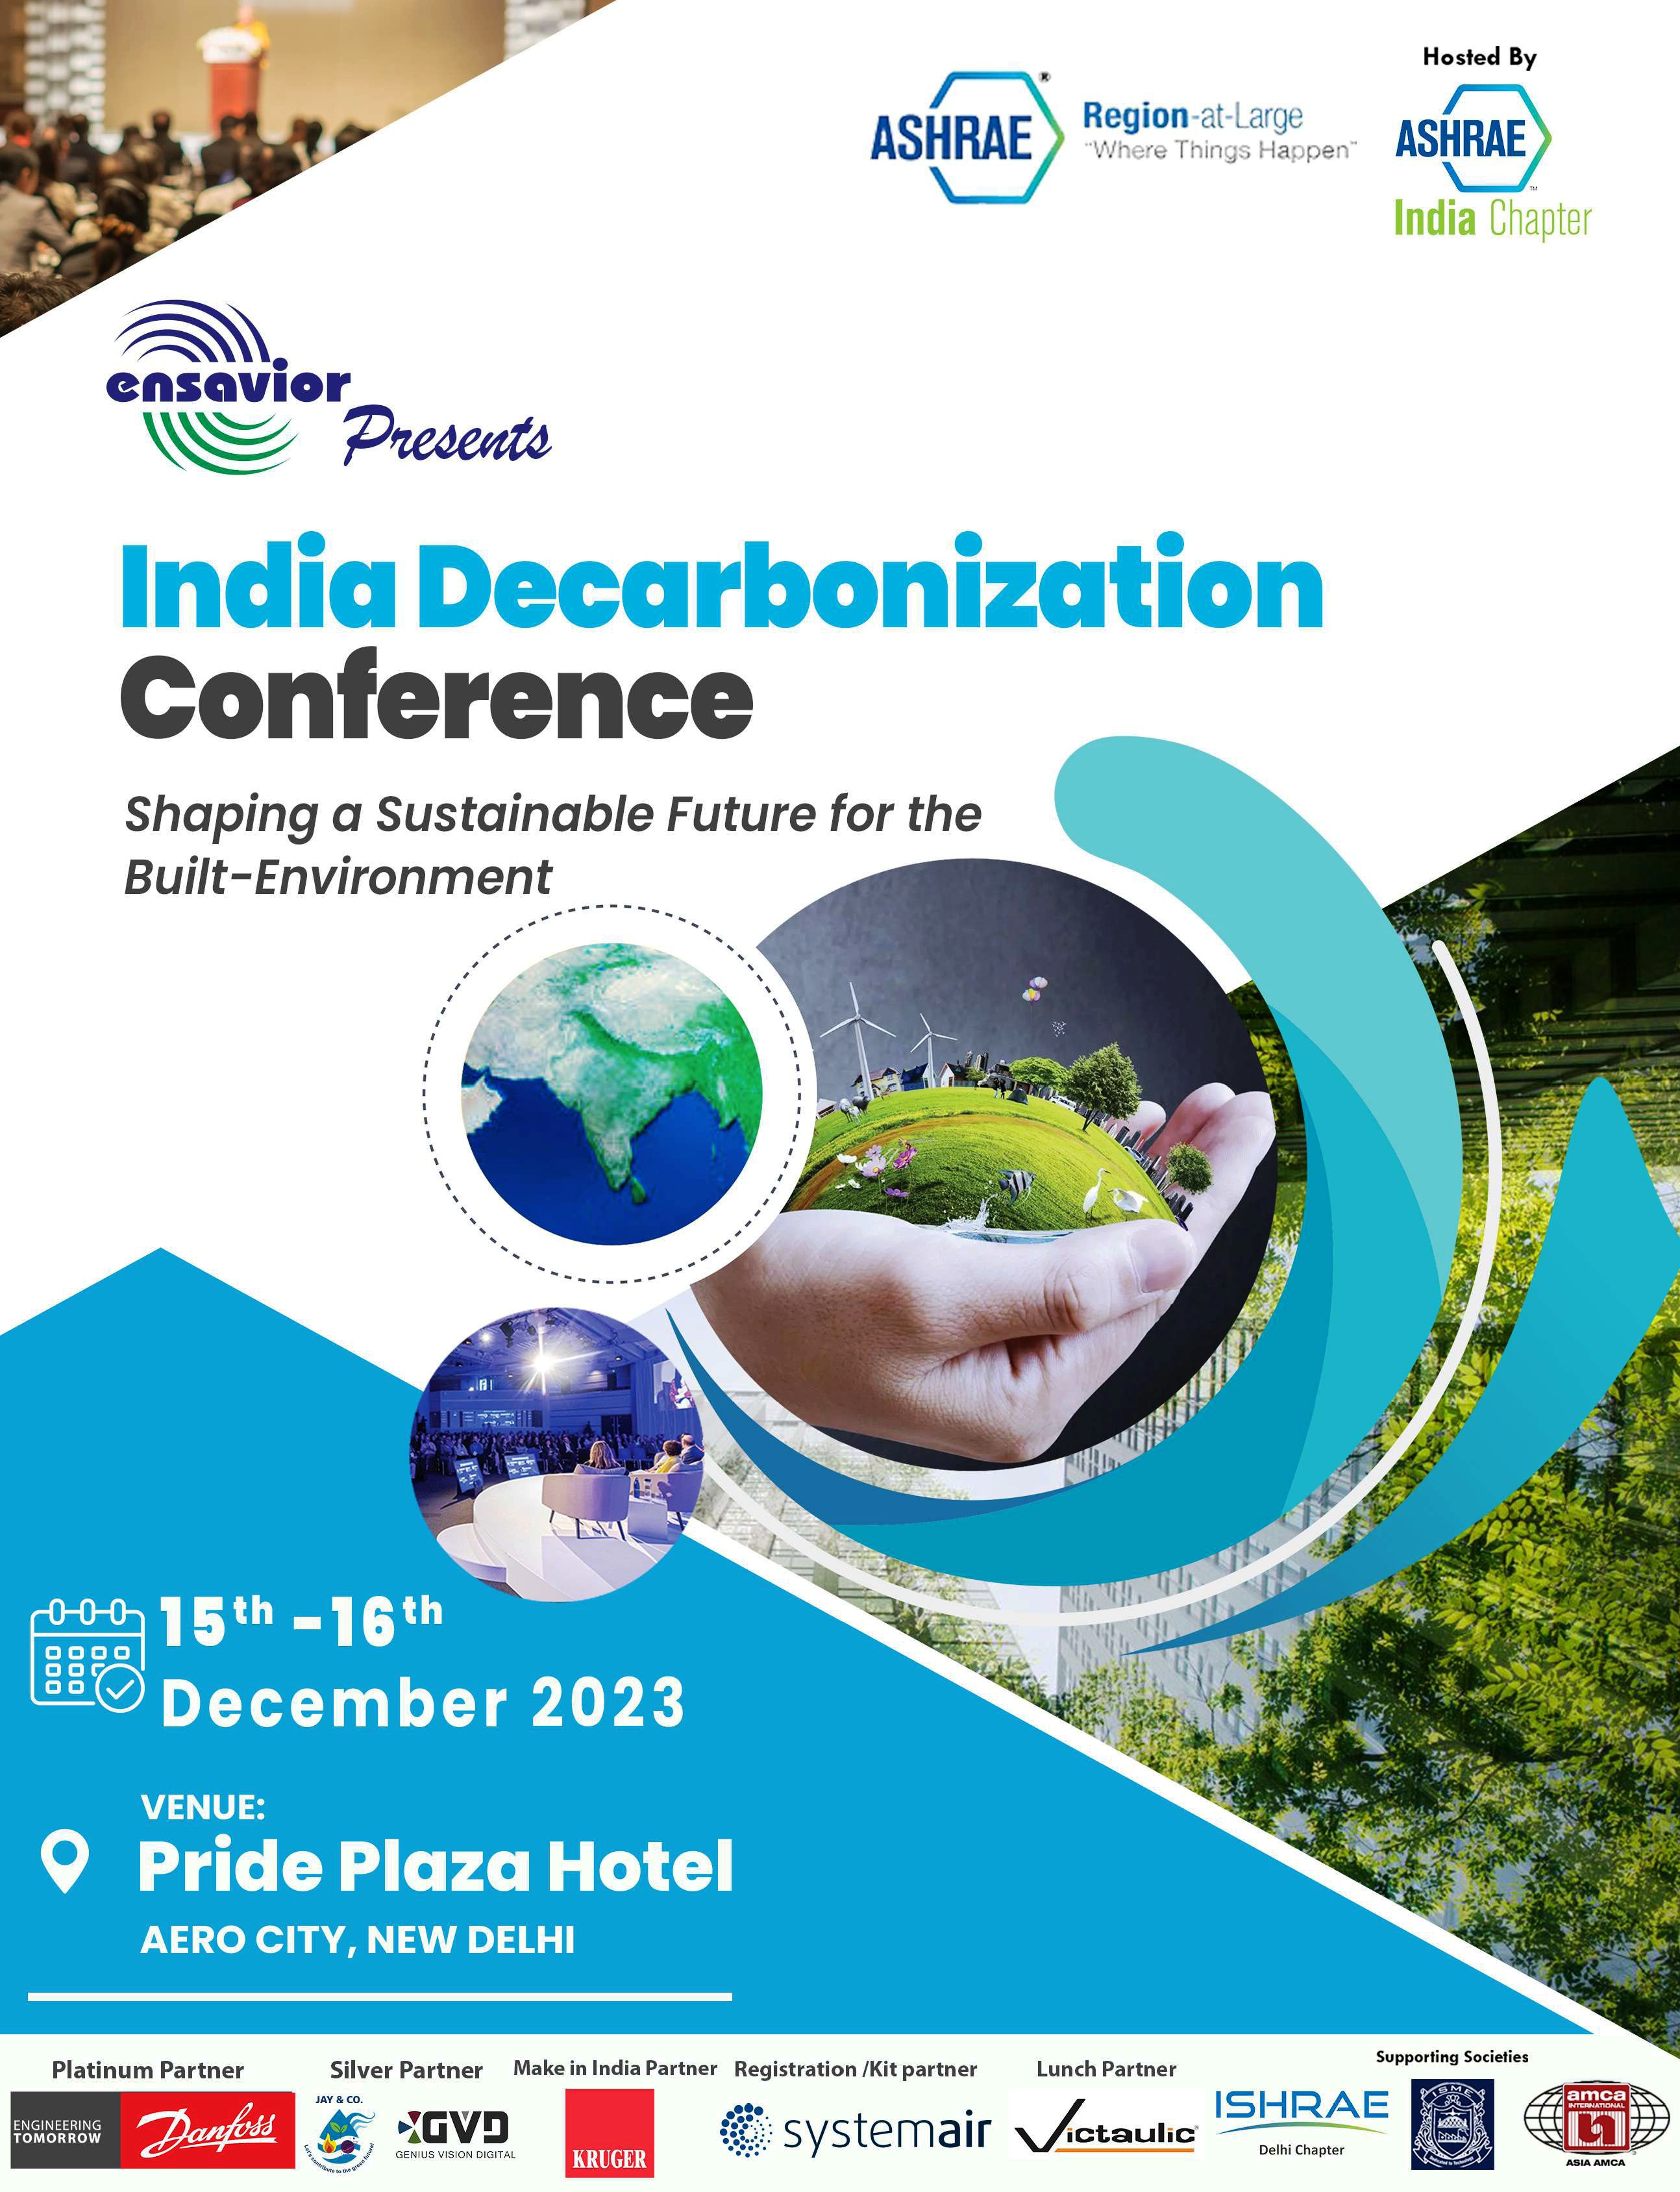 “India Decarbonization Conference” Shaping a Sustainable Future for the Built-Environment, New Delhi, Delhi, India